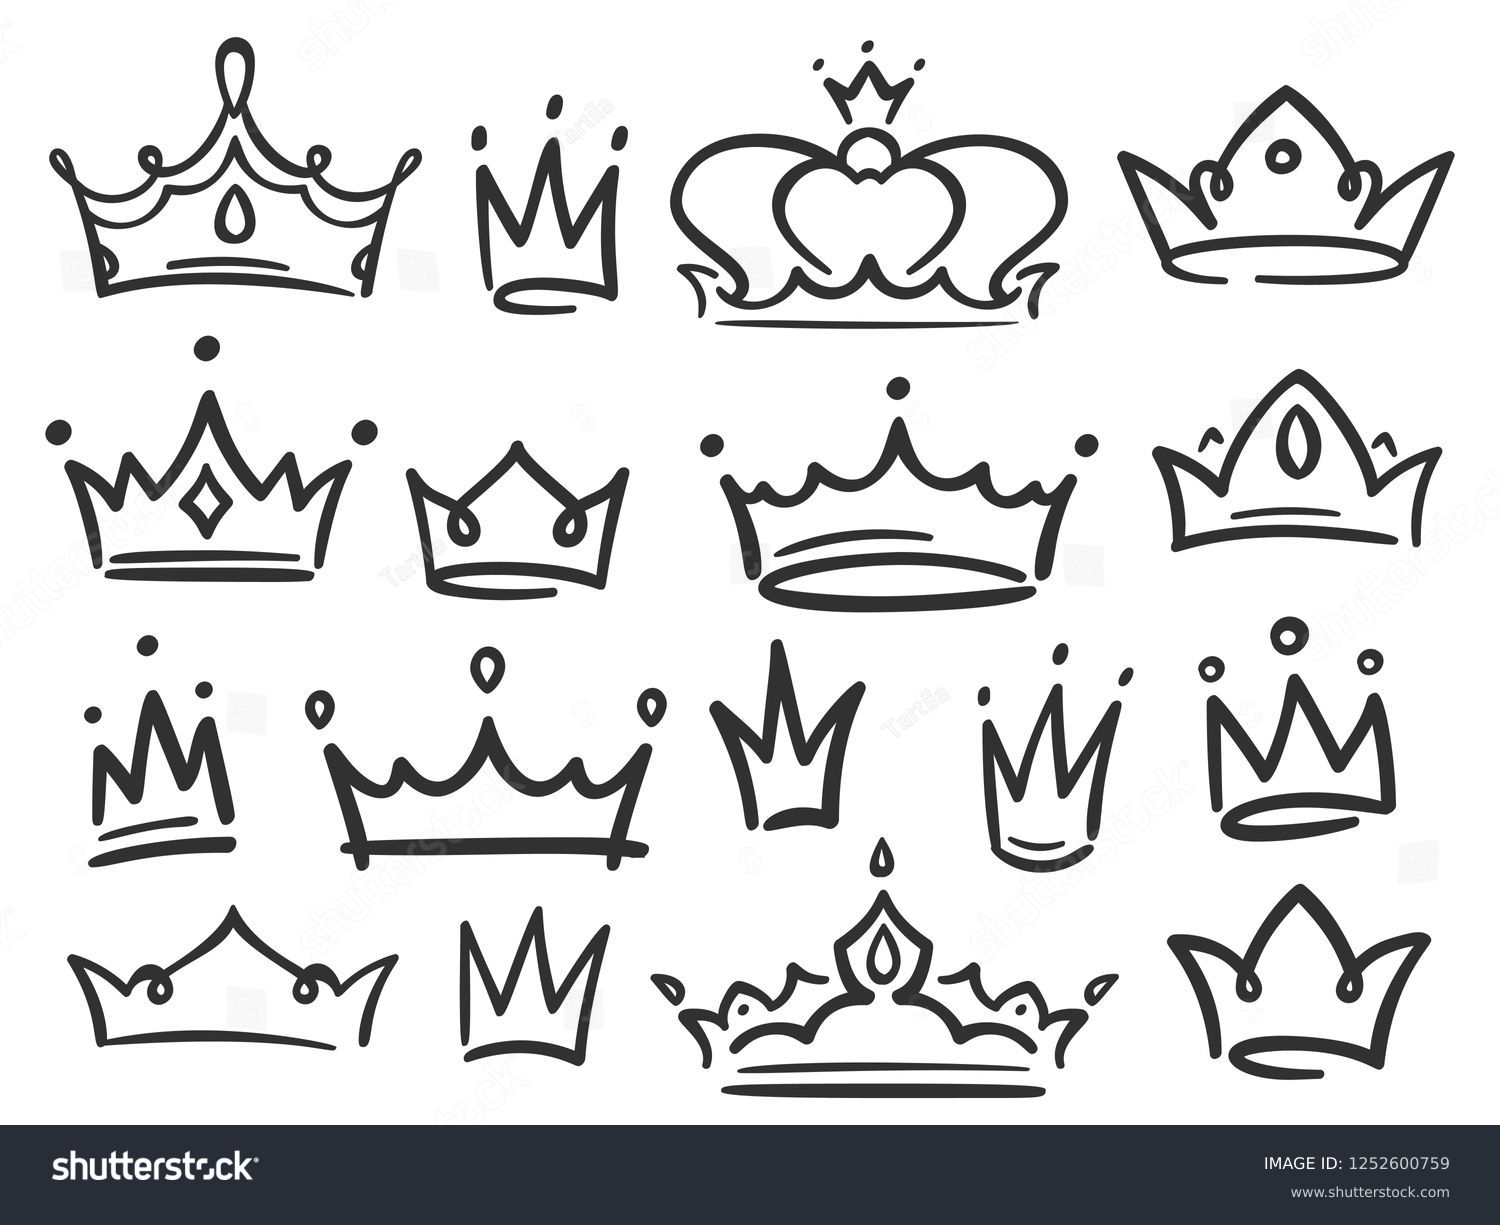 Sketch crown. Simple graffiti crowning, elegant queen or king crowns hand drawn. Royal imperial coronation symbols, monarch majestic jewel tiara isolated icons vector illustration set #1252600759